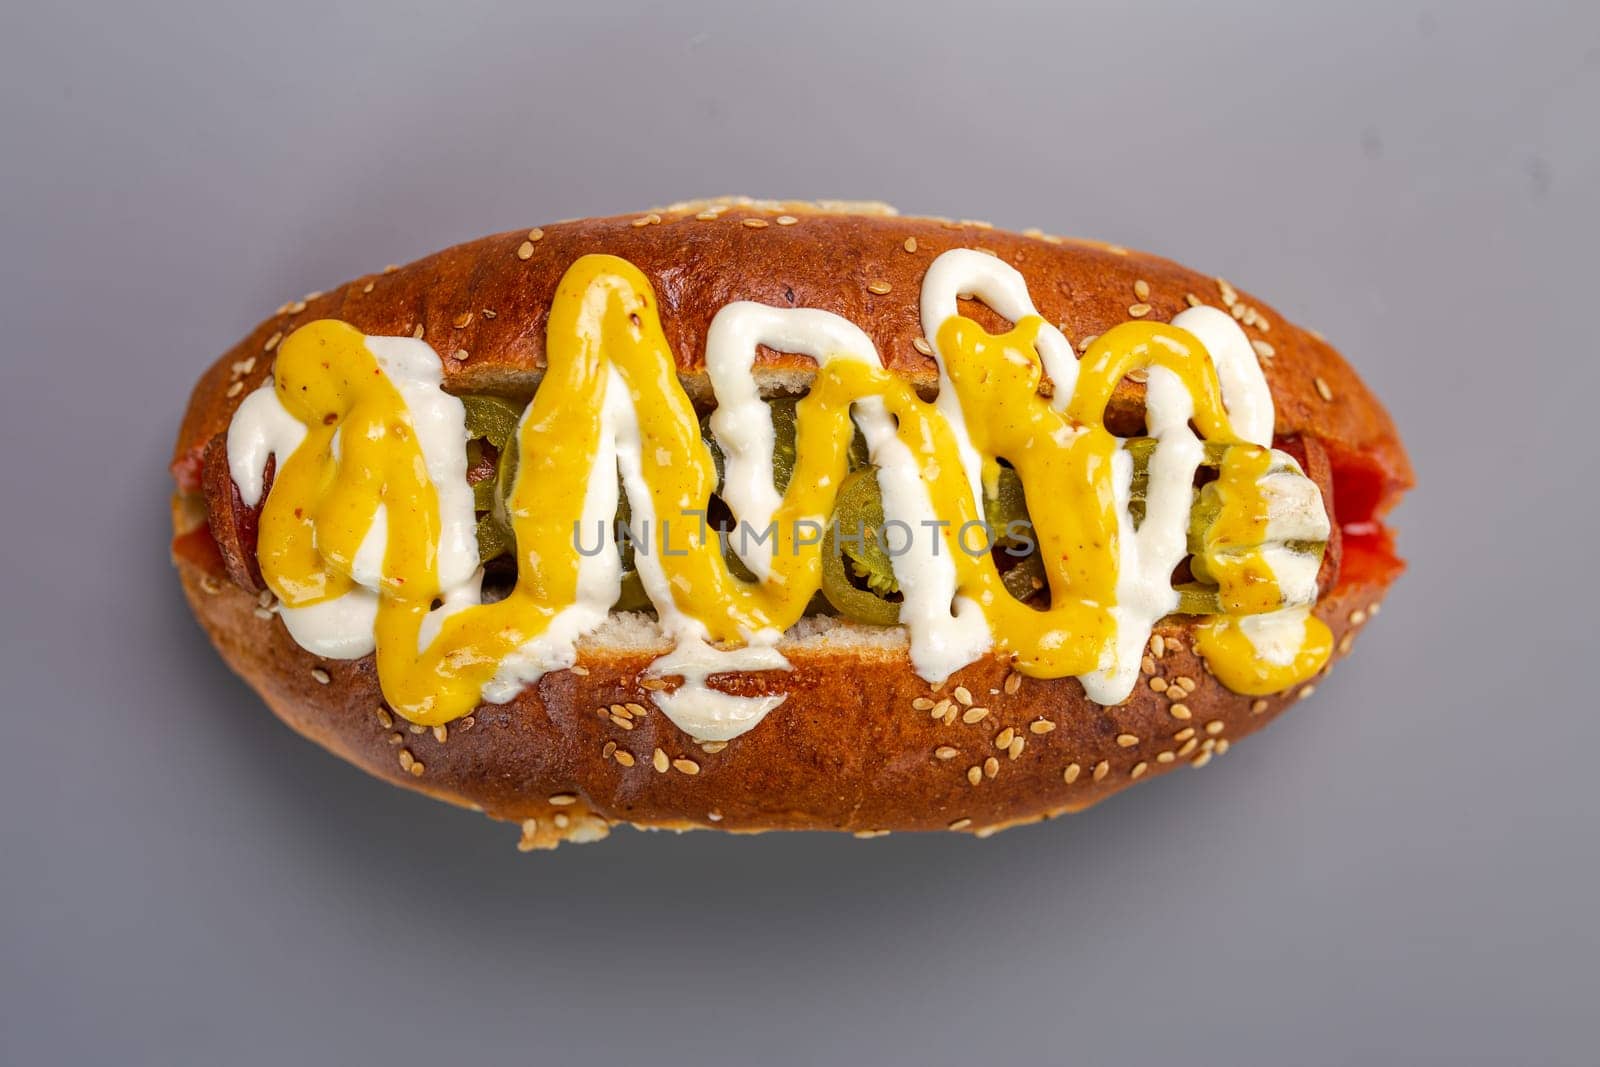 Hot dog sausage in a bun with sauces, isolated on a gray background.